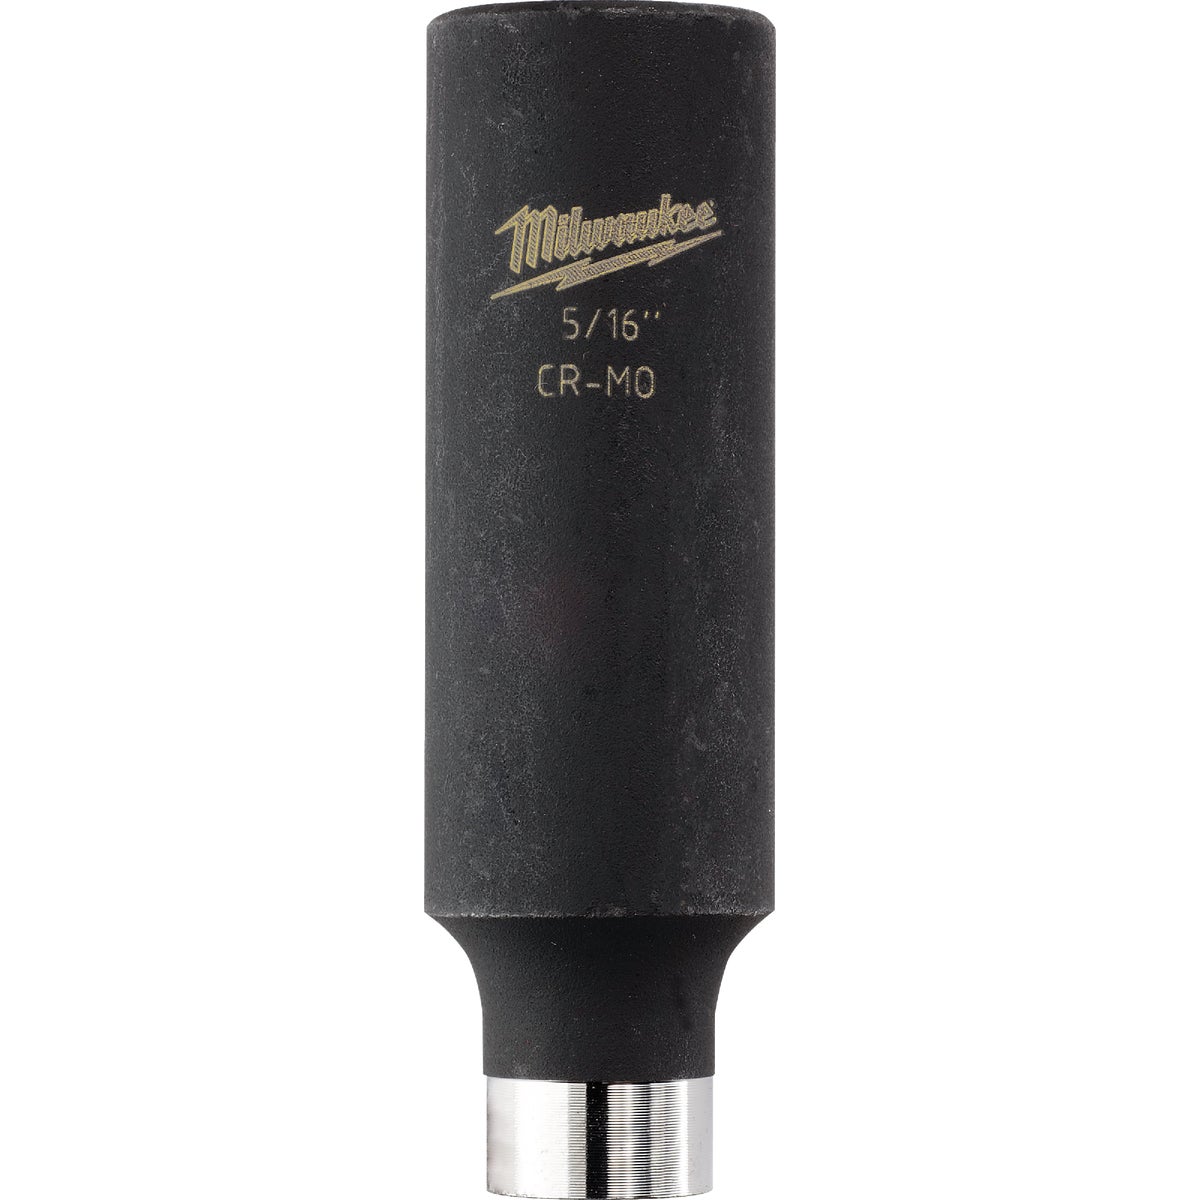 Item 349933, The MILWAUKEE SHOCKWAVE Impact Duty Deep 6 Point Socket feature the boldest